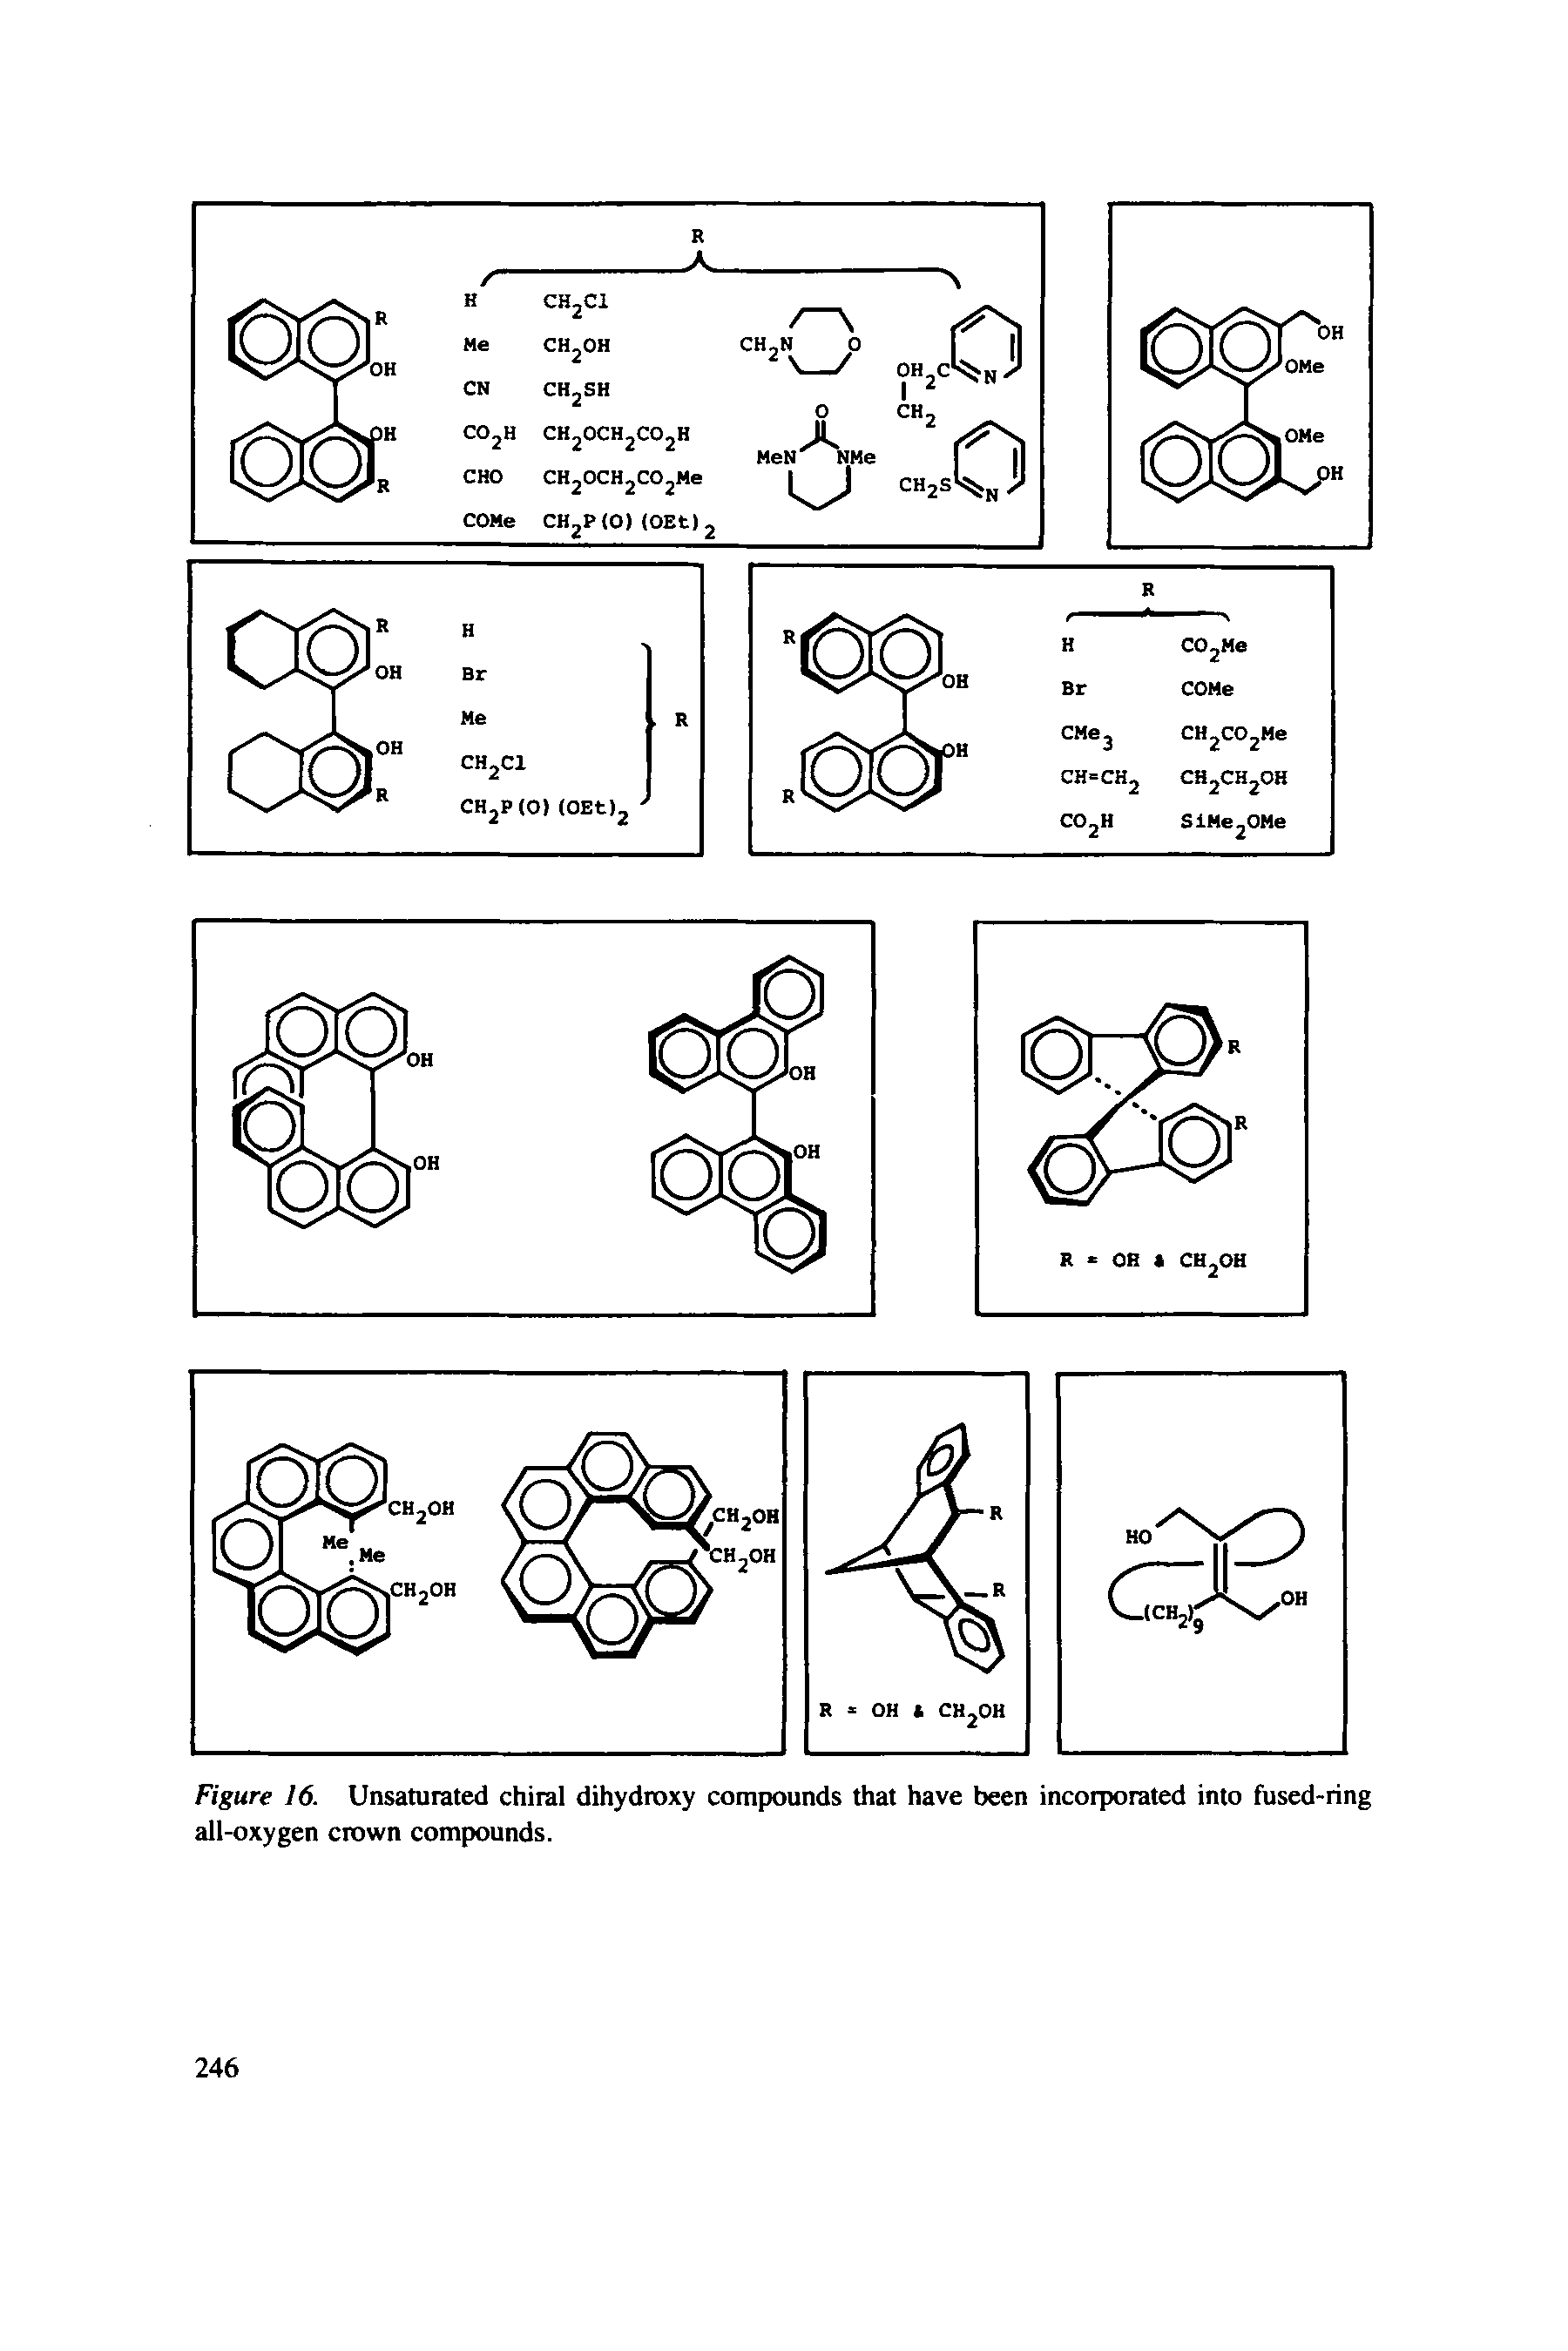 Figure 16. Unsaturated chiral dihydroxy compounds that have been incorporated into fused-ring all-oxygen crown compounds.